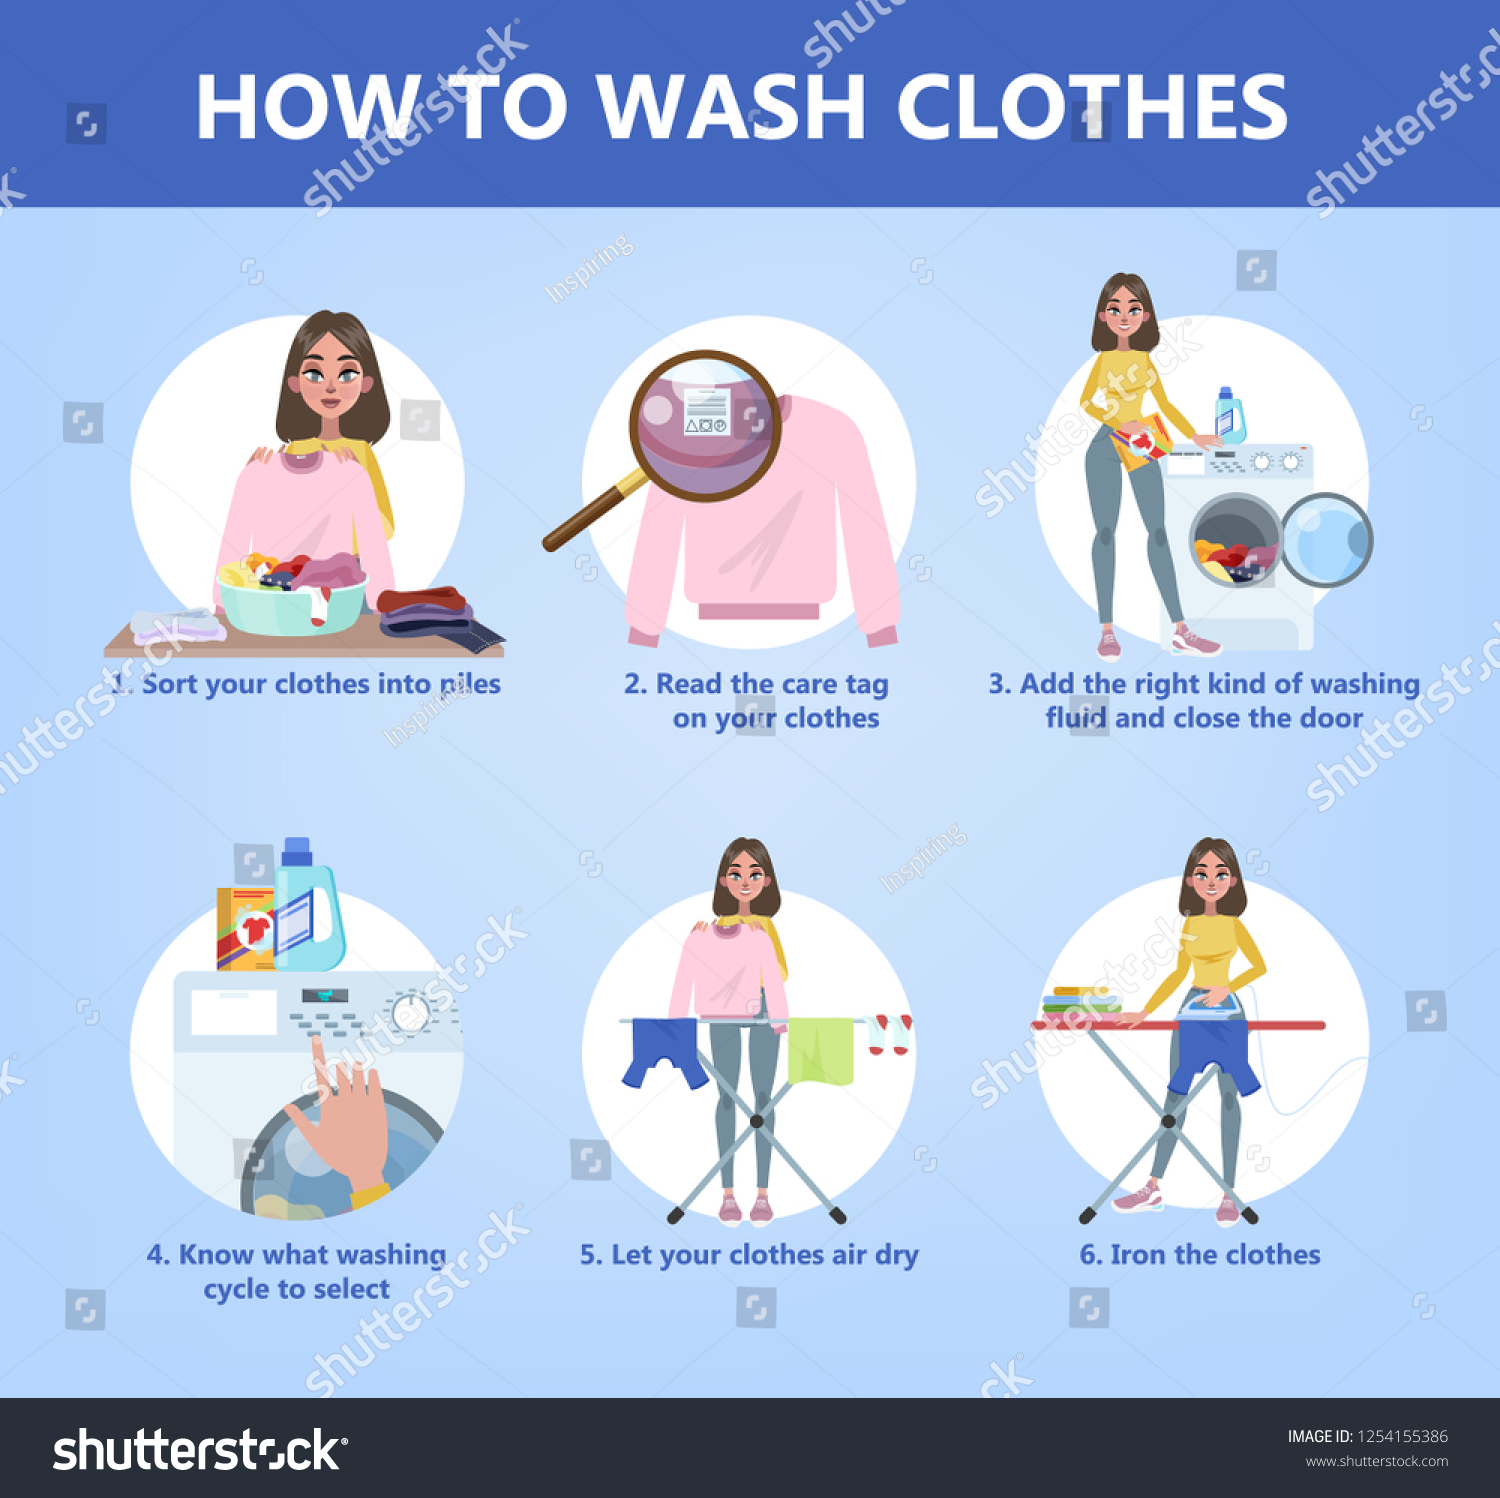 SVG of How to wash clothes by hand step-by-step guide for housewife. Clothing care instruction. Detergent or powder for different type of clothes. Isolated flat vector illustration svg